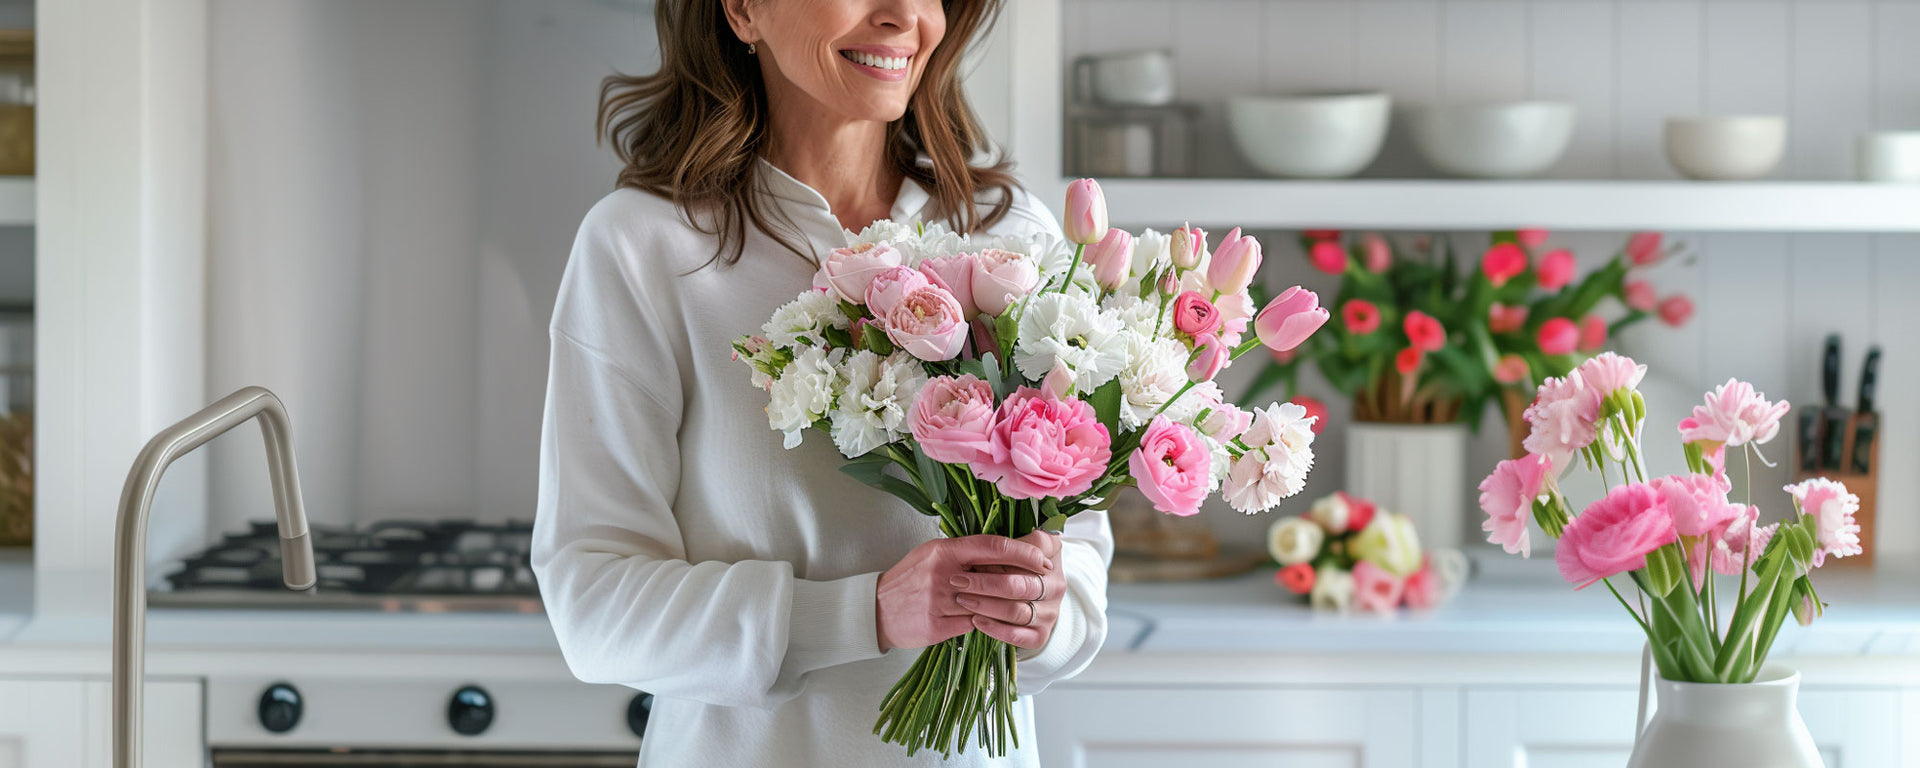 Mothers Day Flowers Delivery UK